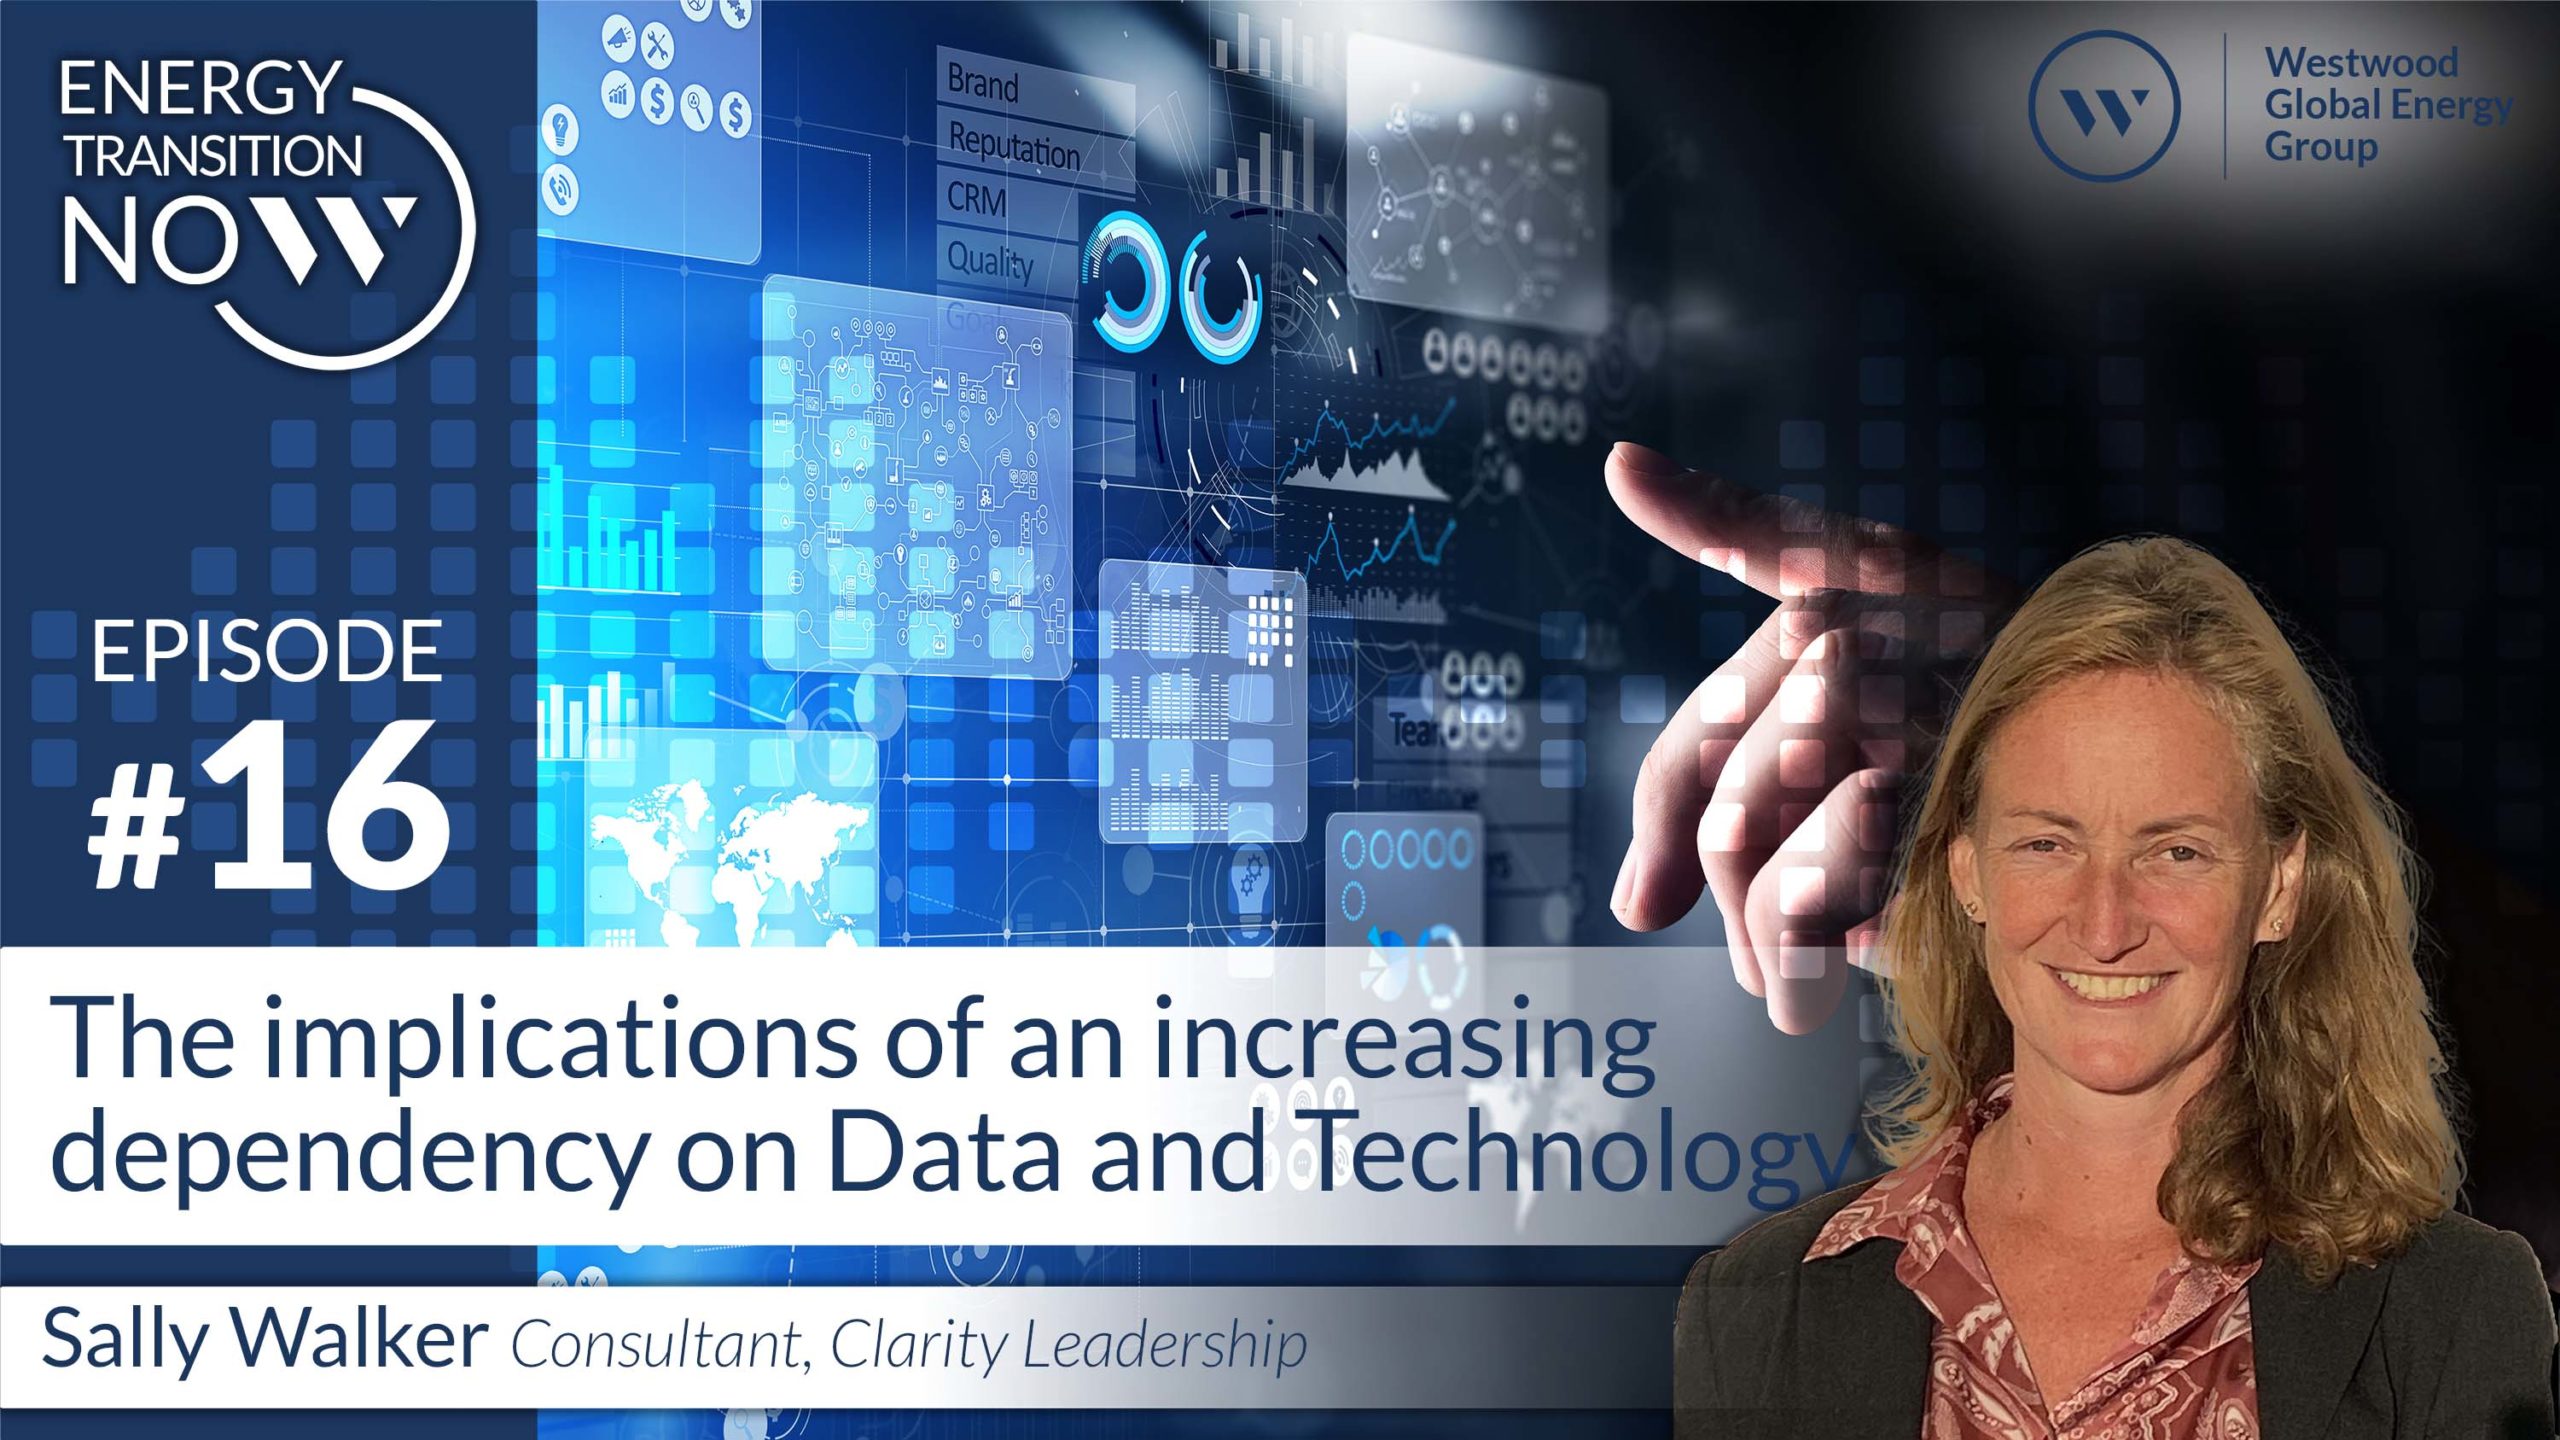 The implications of an increasing dependency on data and technology